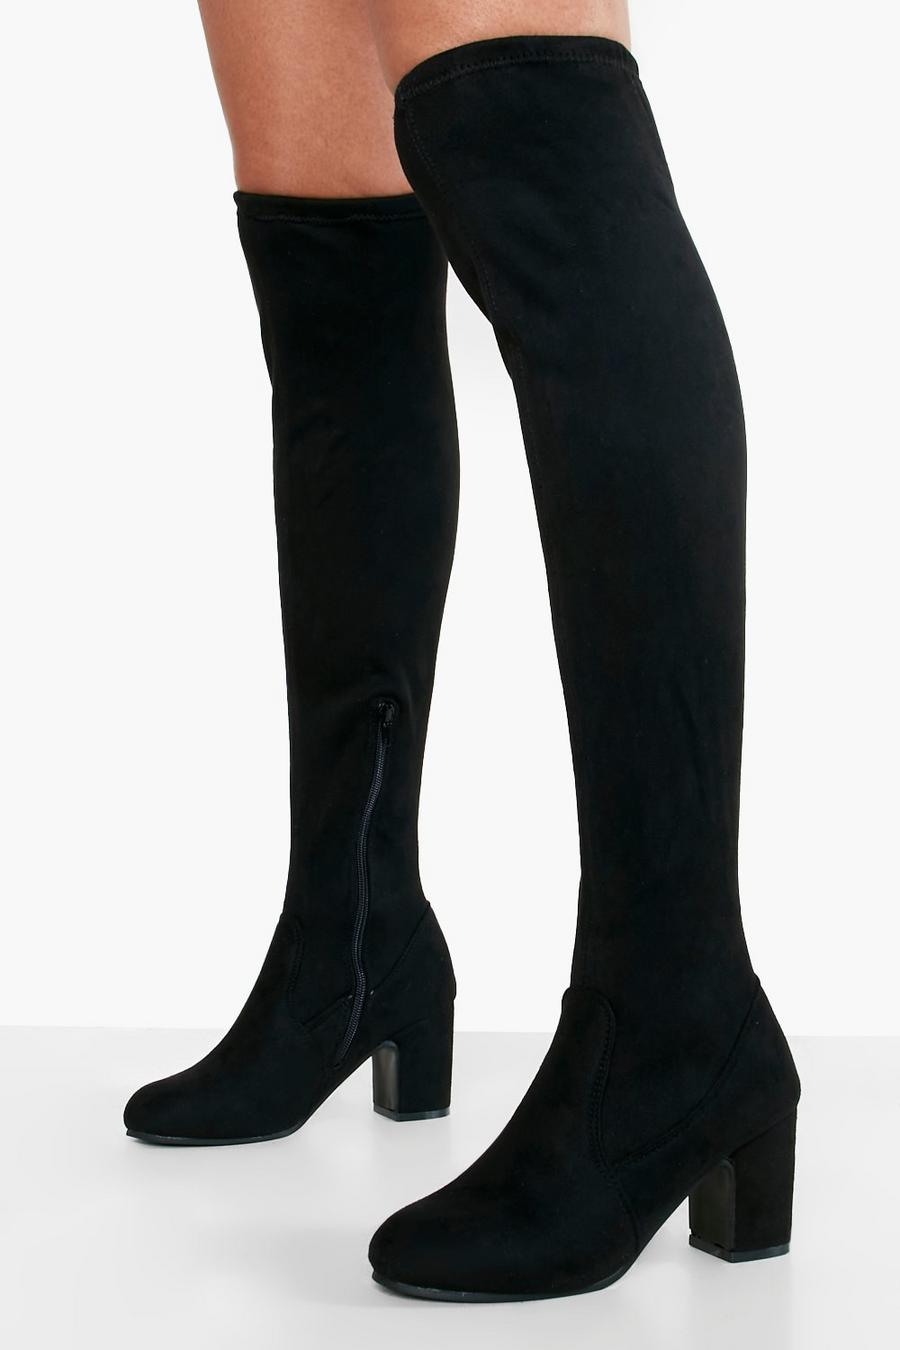 Black Wide Fit Block Heel Stretch Over The Knee Boots image number 1